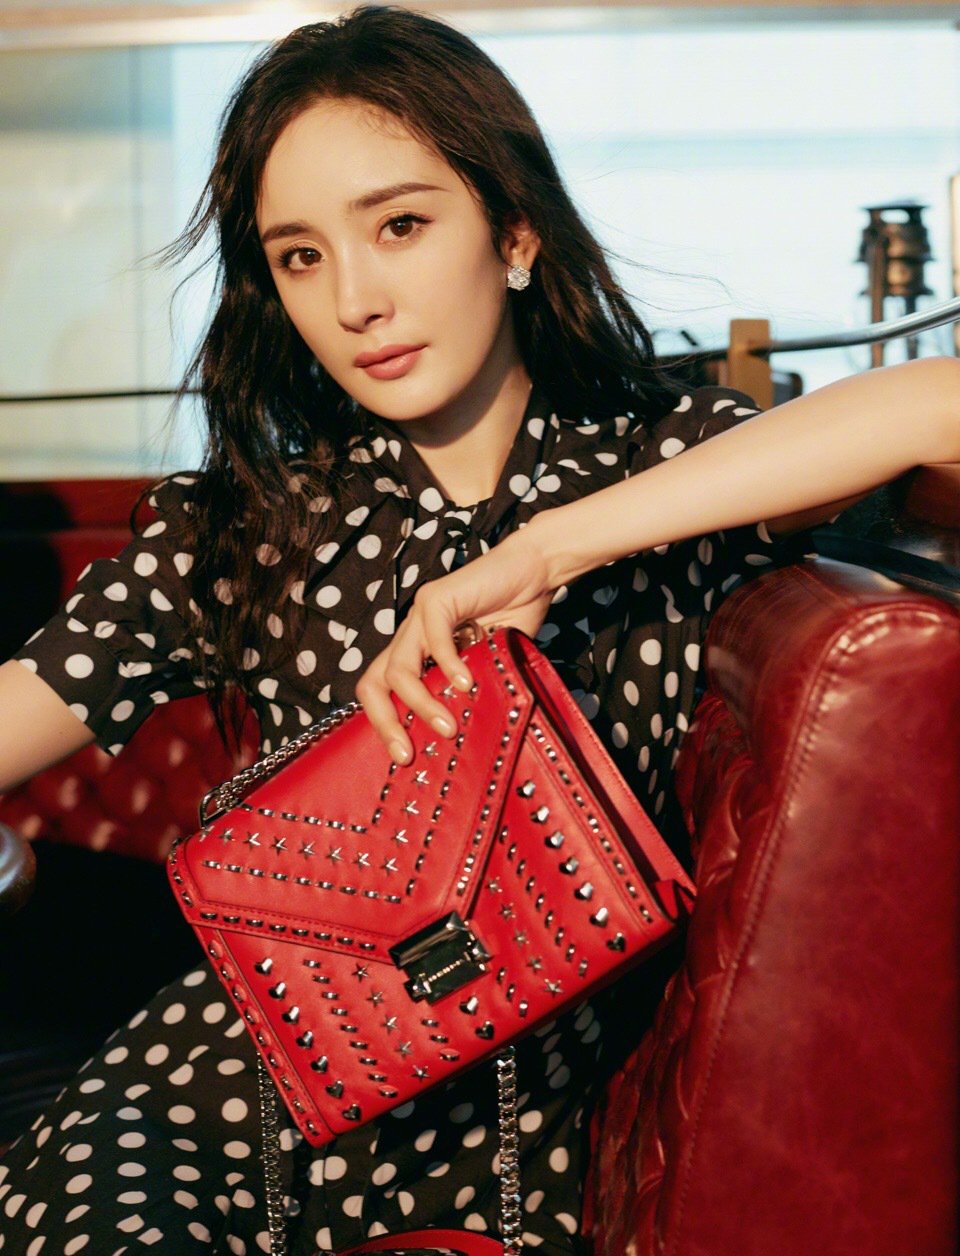 Michael Kors Chinese star Yang Mi team up for special collection   Vancouver Sun